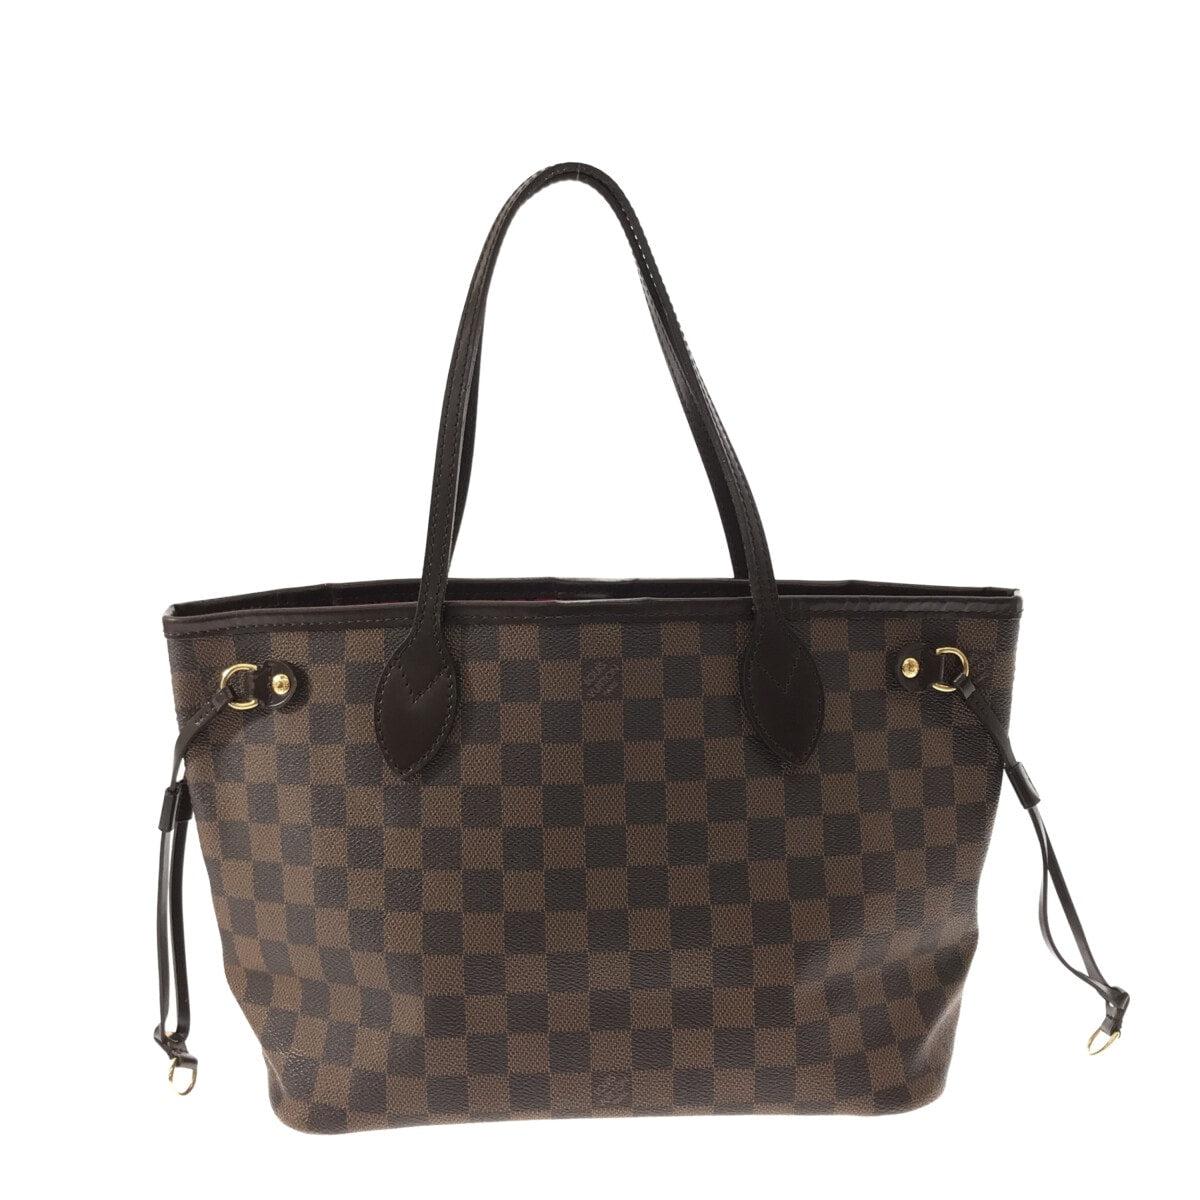 Louis Vuitton Neverfull Pm Canvas Tote Bag (pre-owned) in Black